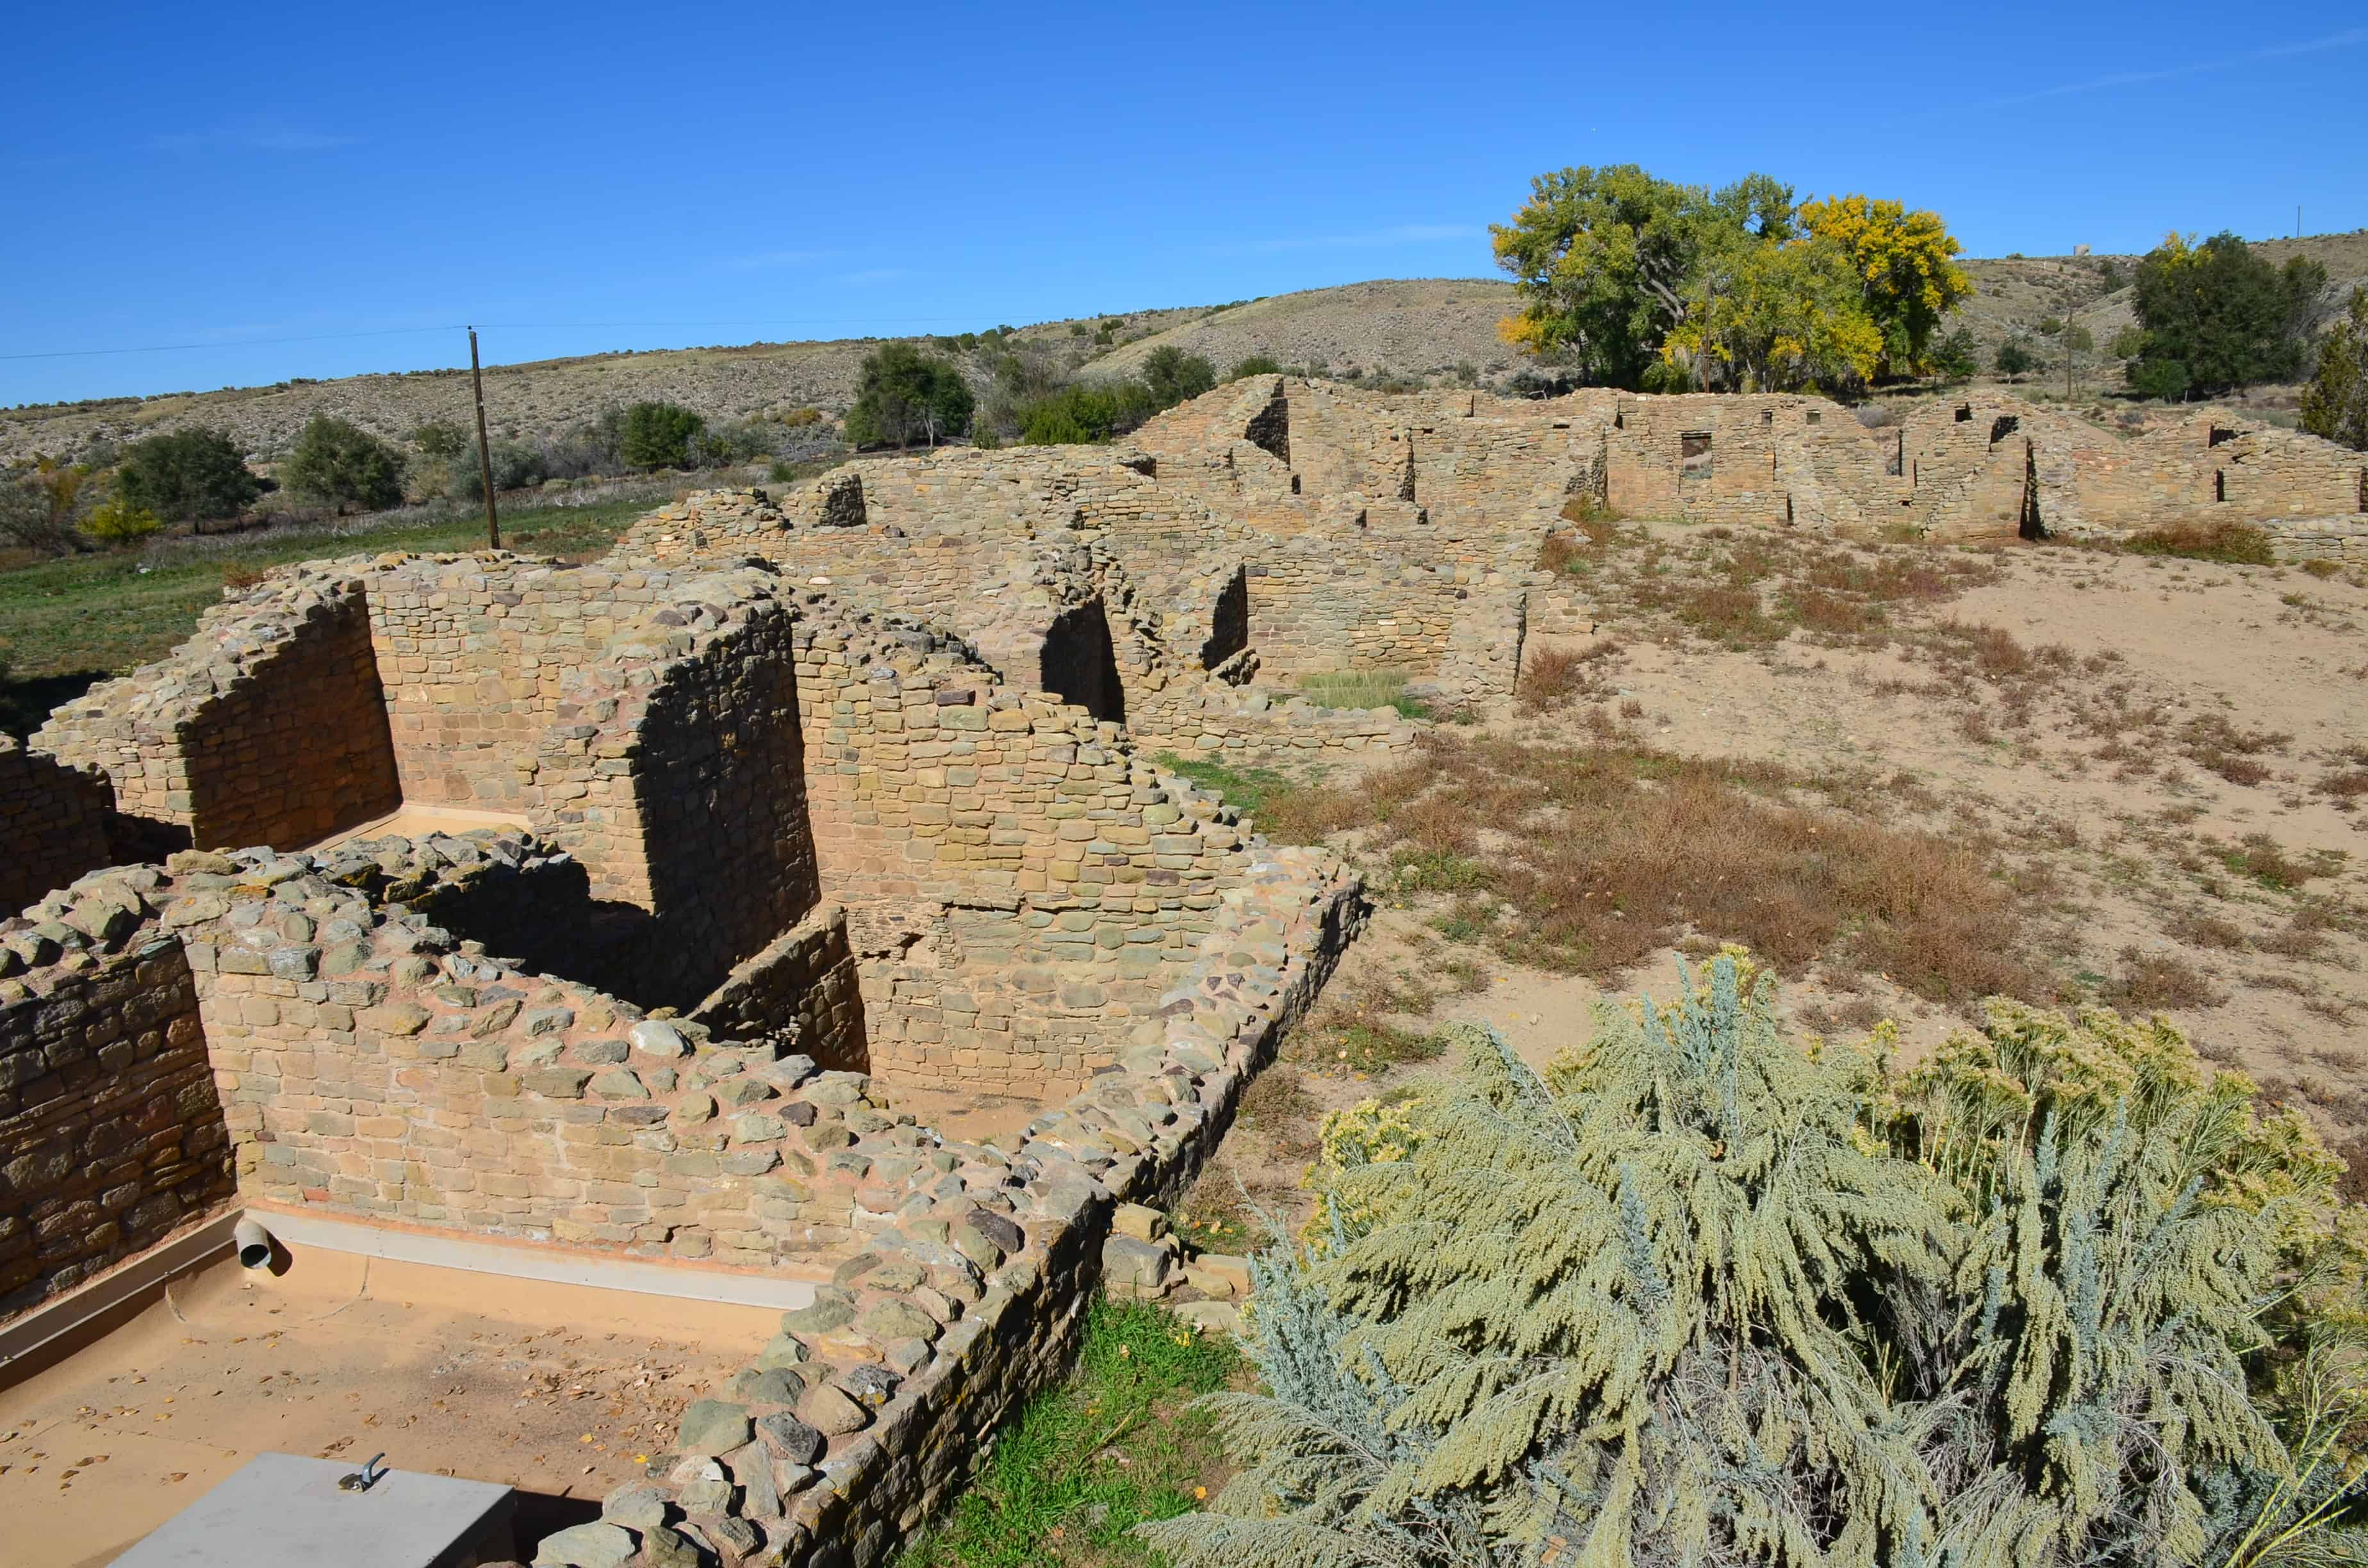 View of the ruins at Aztec West at Aztec Ruins National Monument in New Mexico